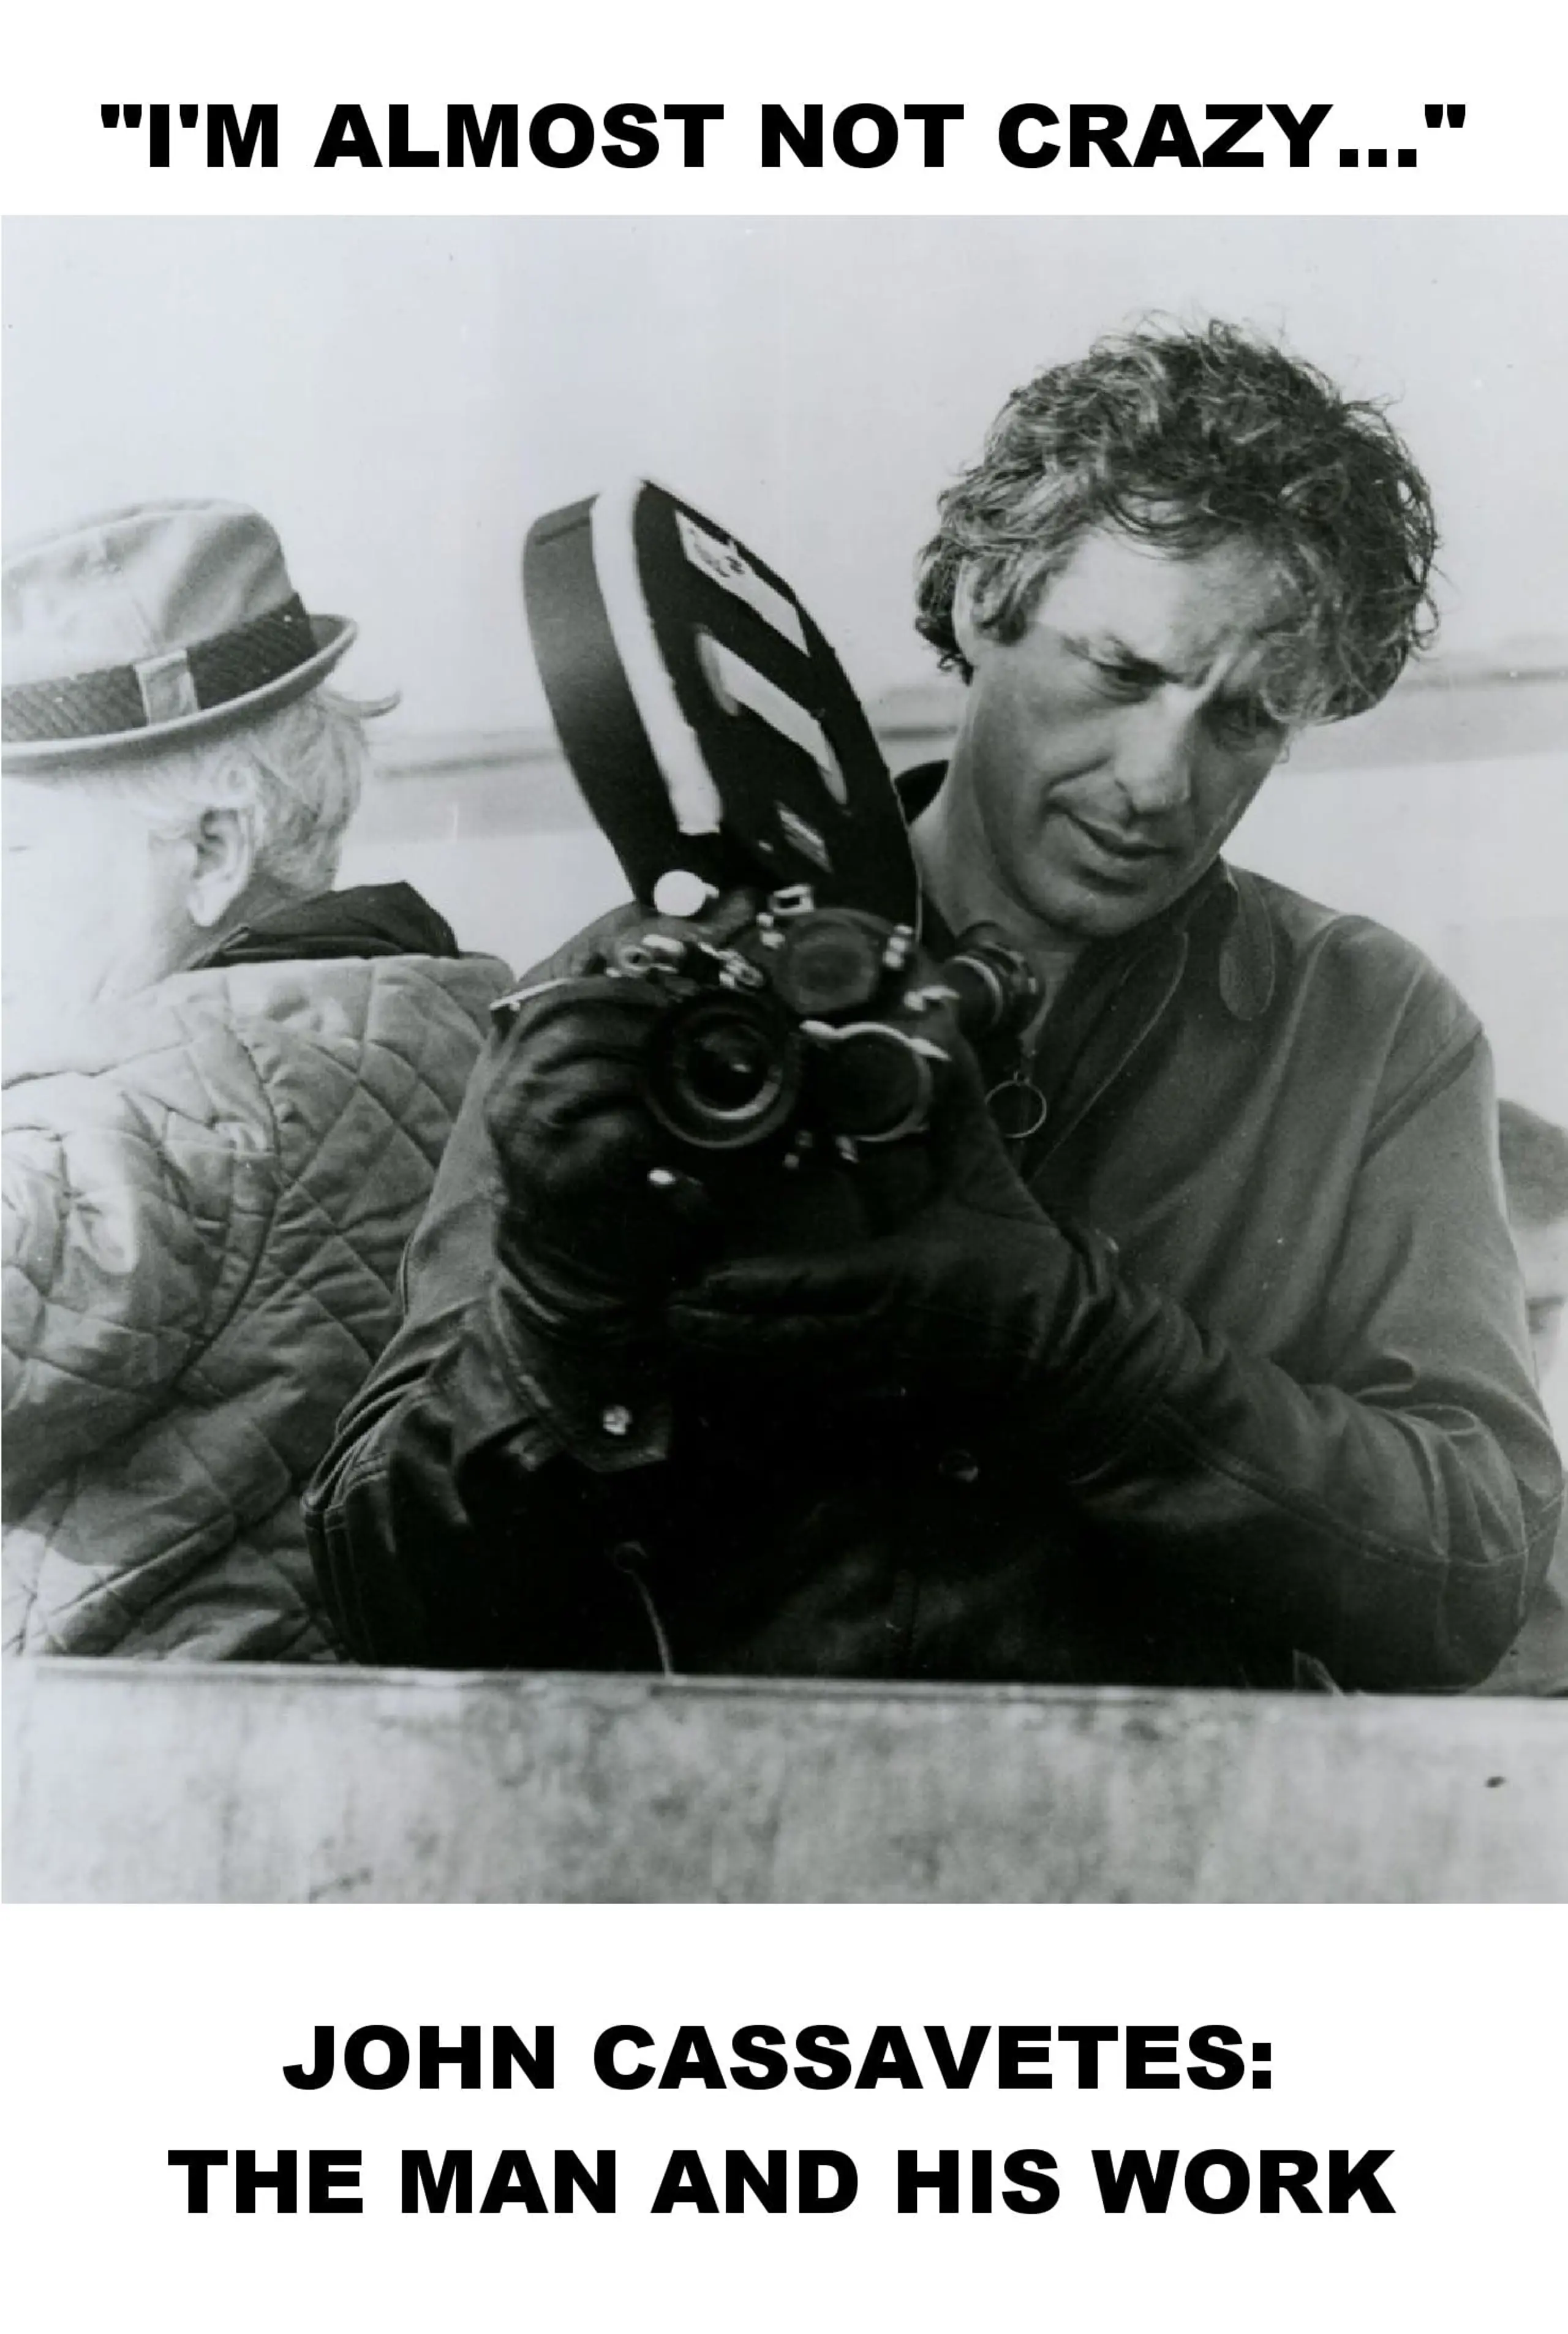 I'm Almost Not Crazy: John Cassavetes - The Man and His Work